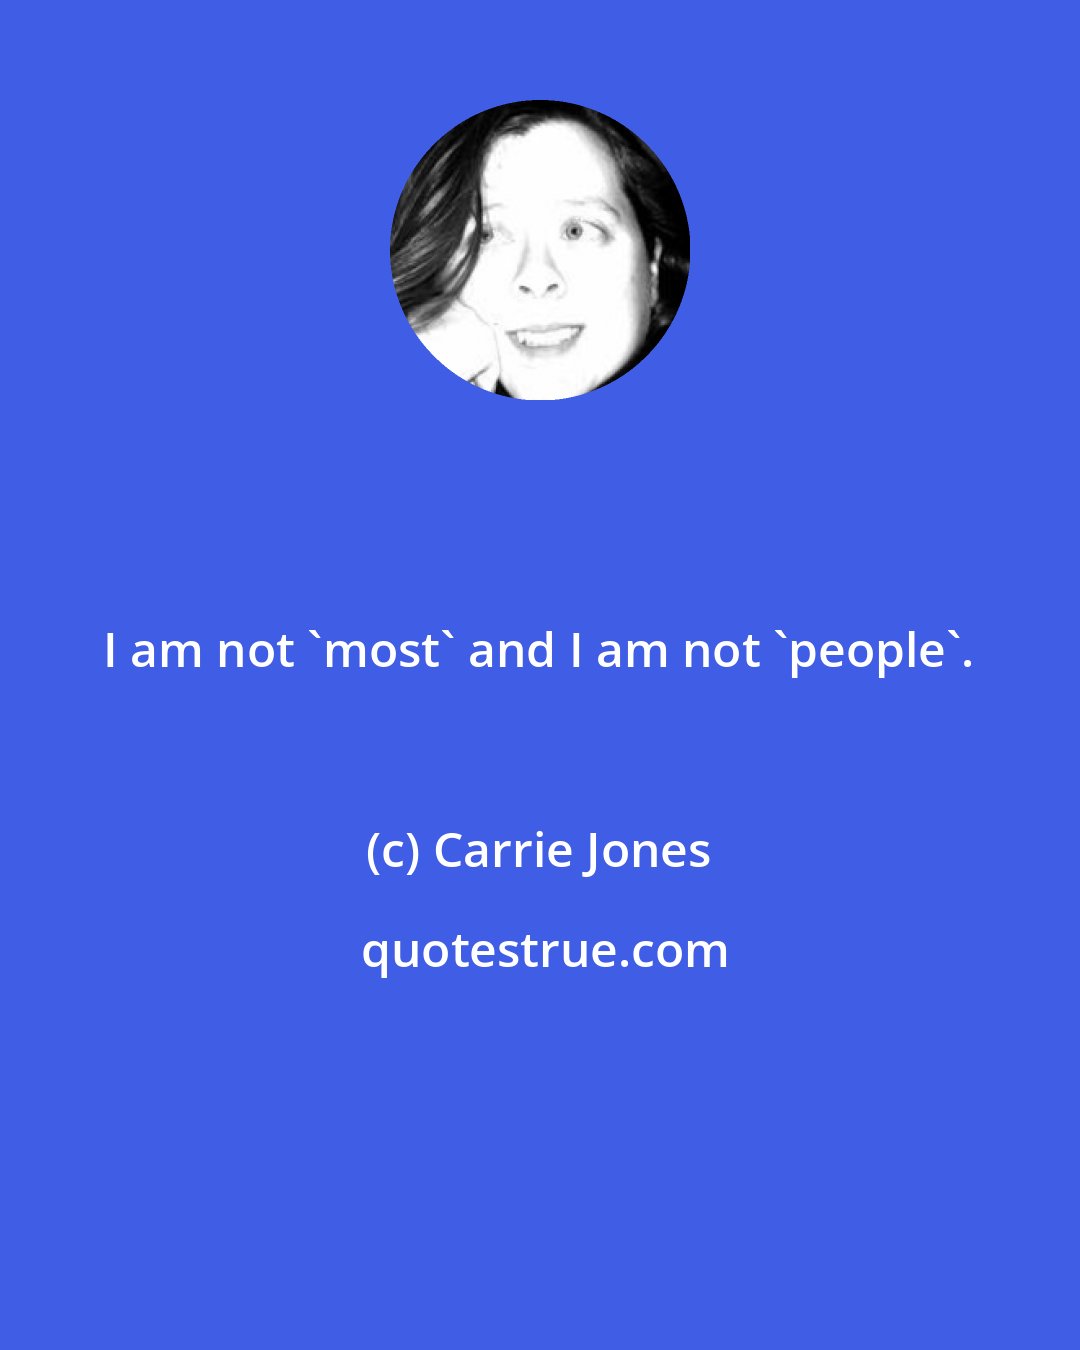 Carrie Jones: I am not 'most' and I am not 'people'.